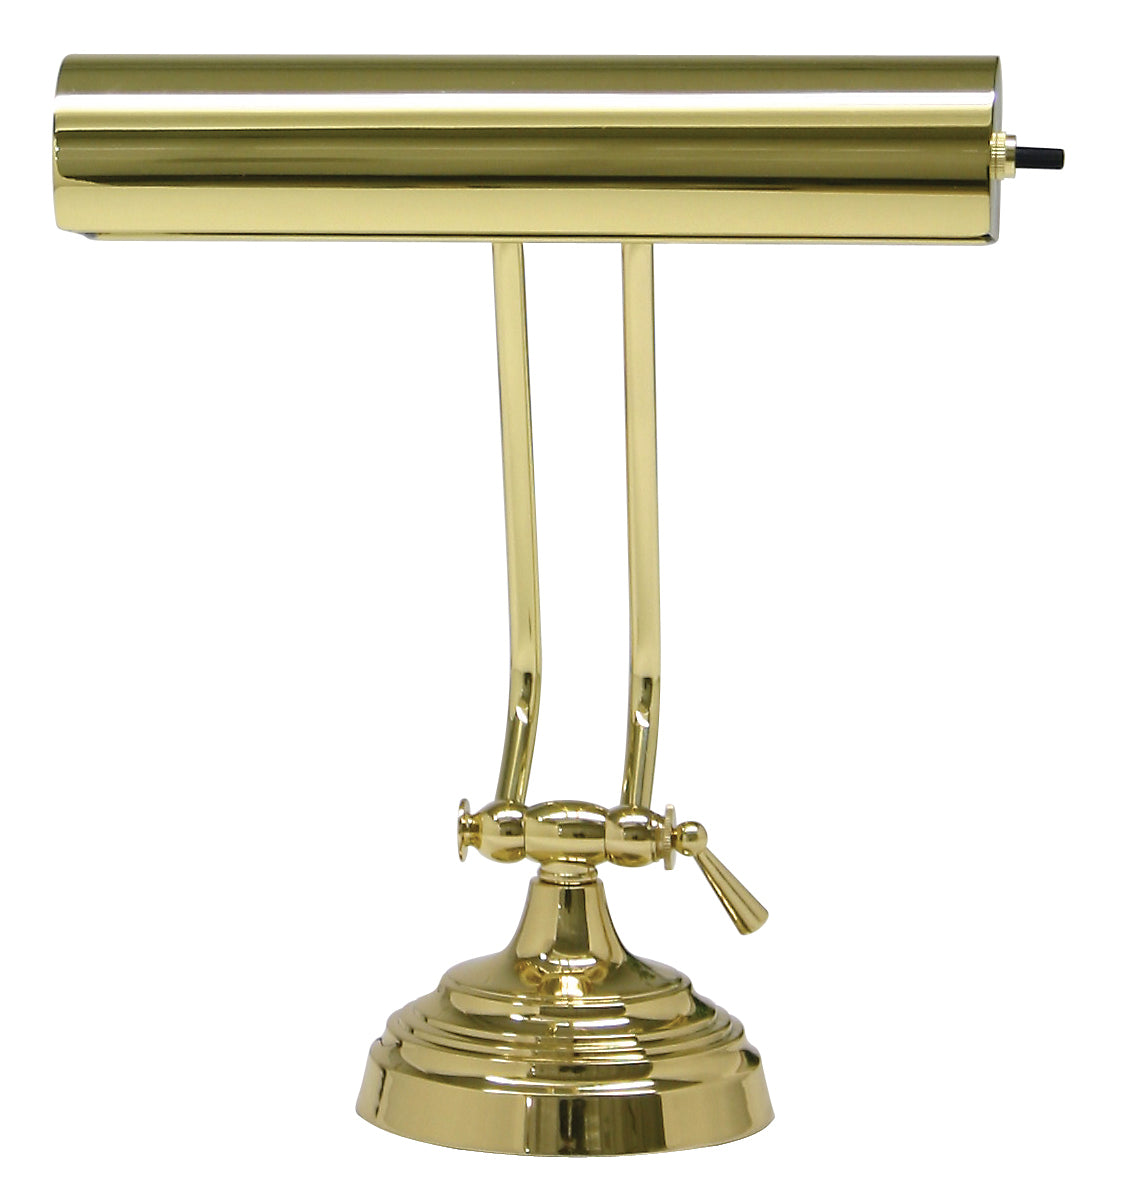 House of Troy Desk/Piano Lamp 10" in Polished Brass P10-131-61